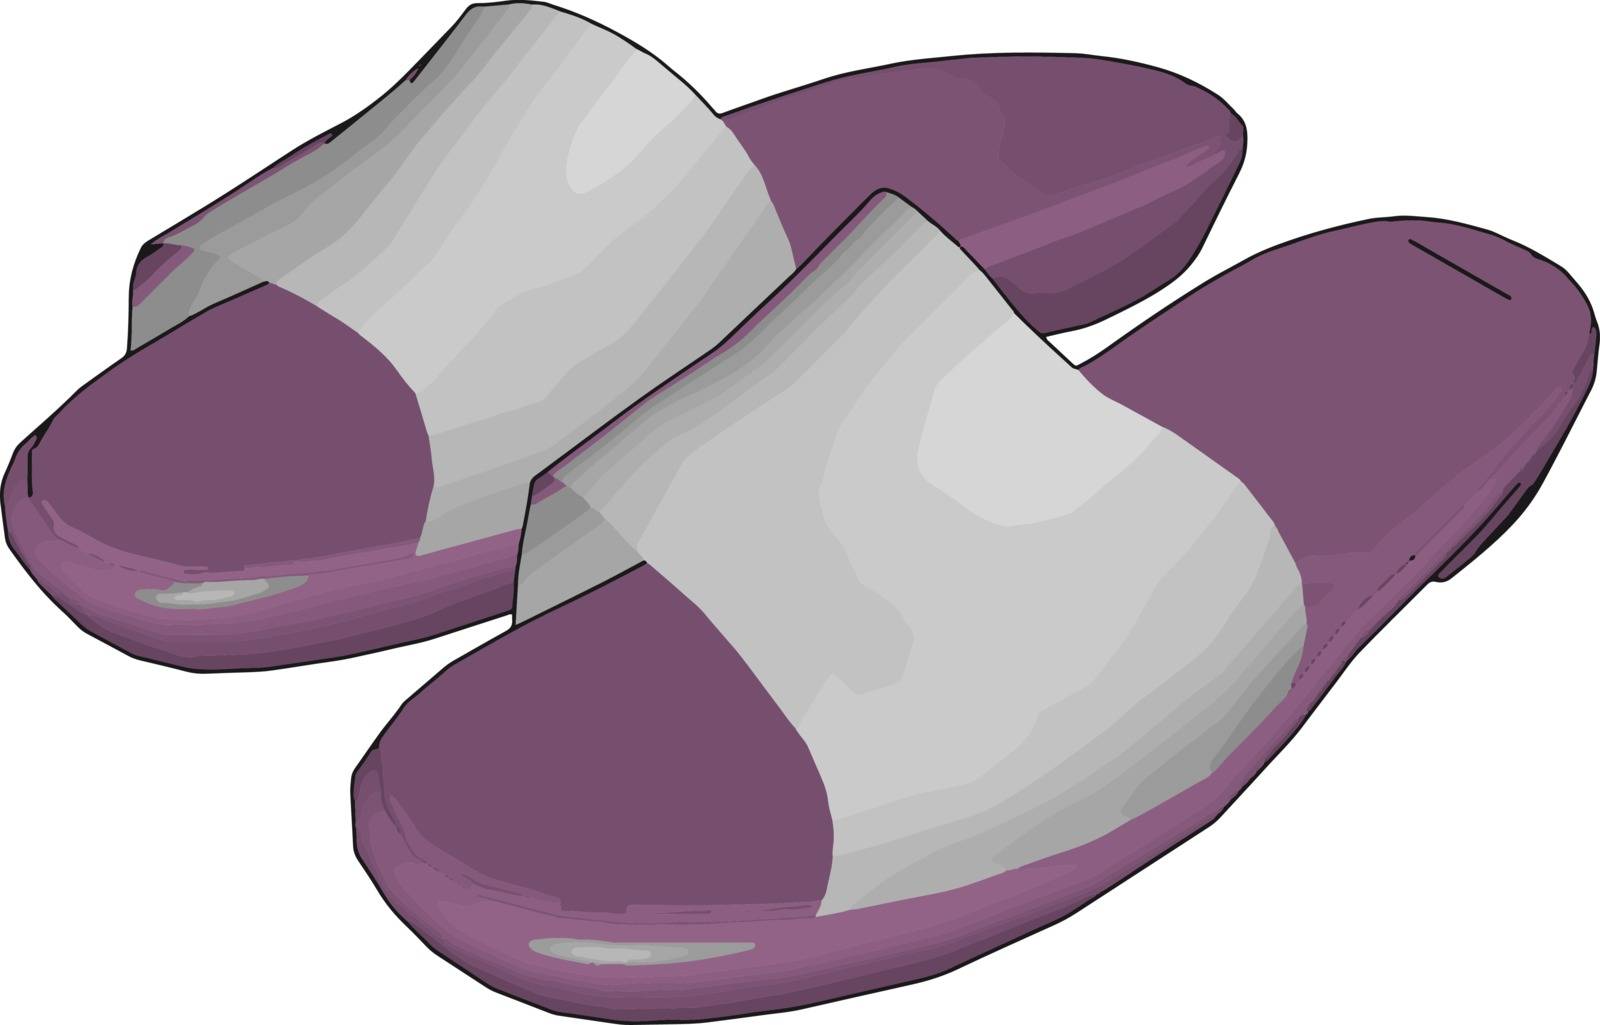 Purple shoes, illustration, vector on white background. by Morphart